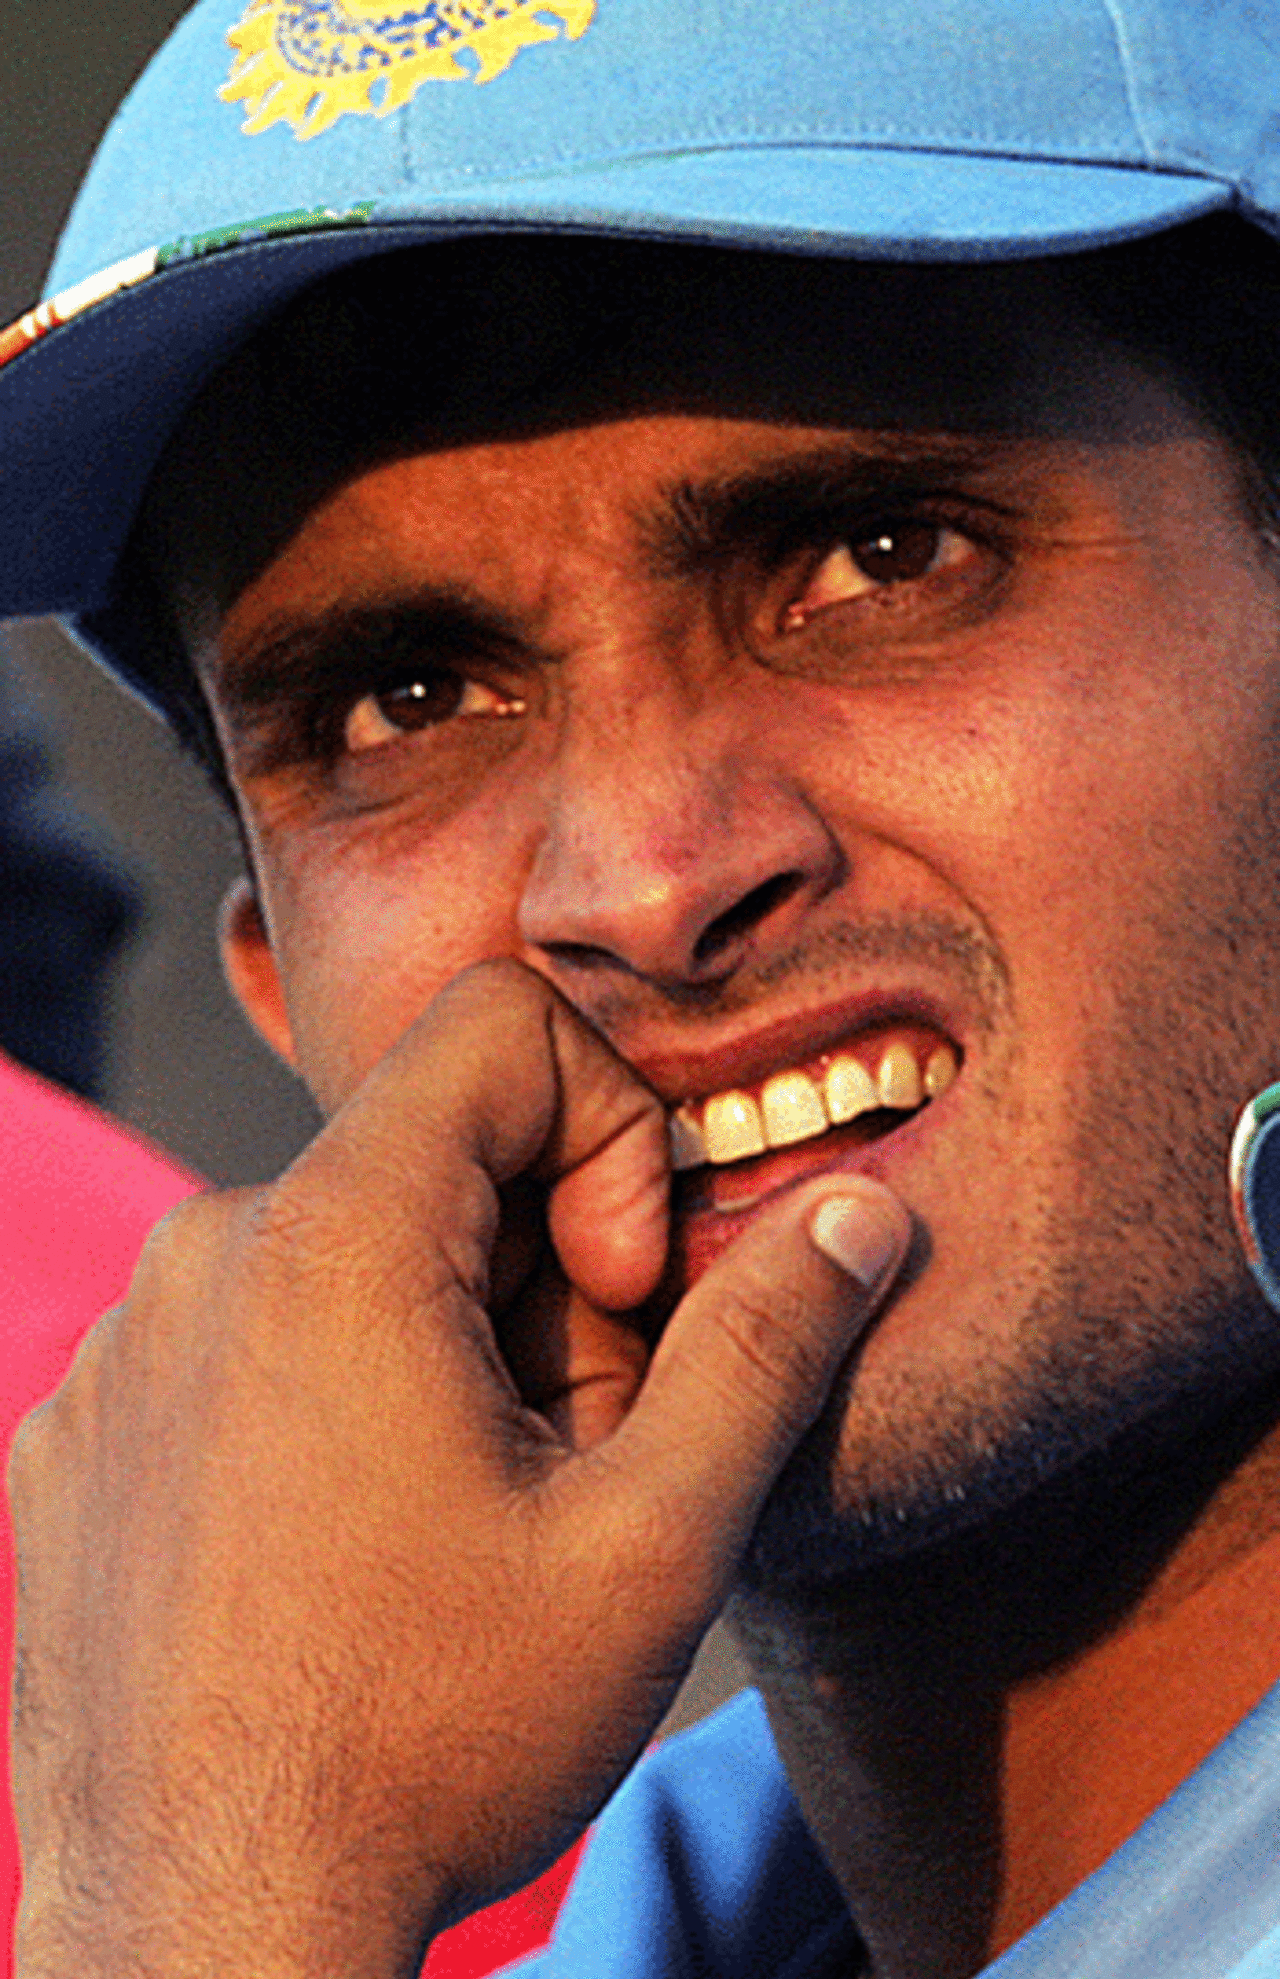 Sourav Ganguly ponders another dismal Indian performance, India v New Zealand, Bulawayo, August 26, 2005